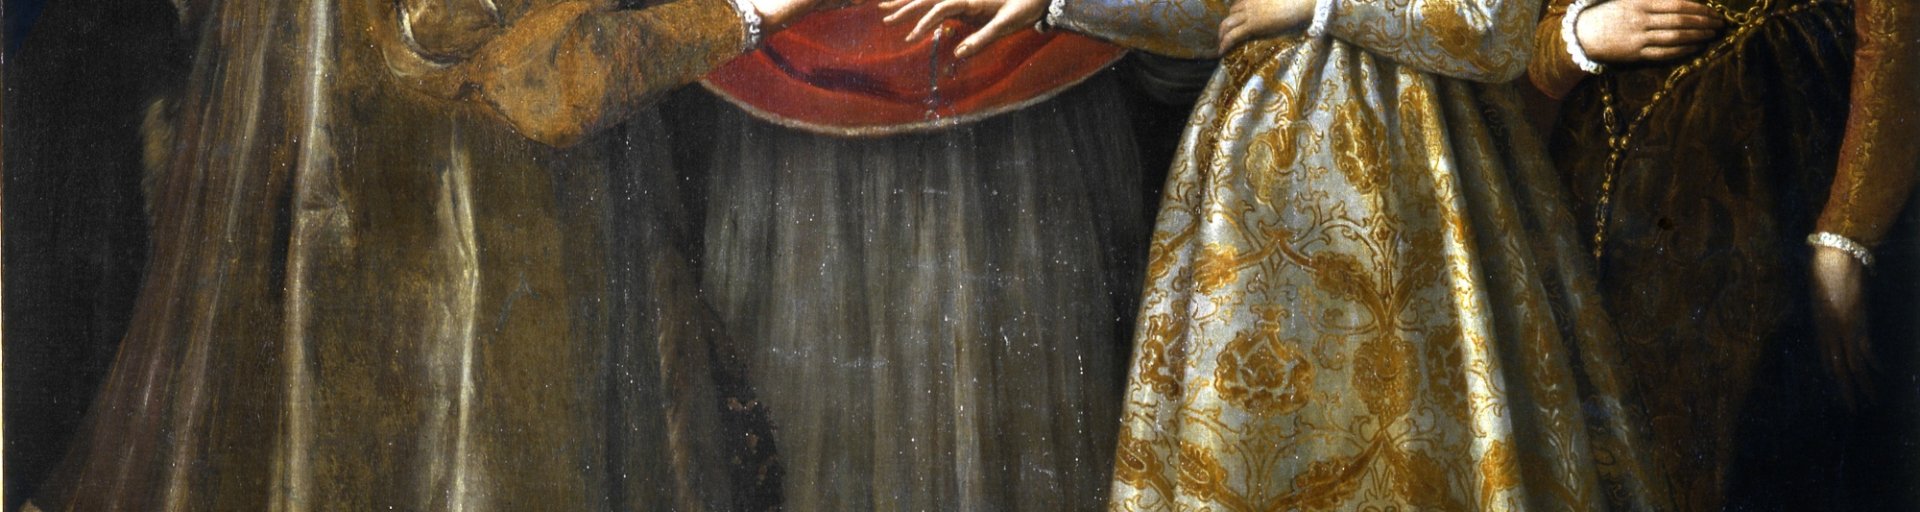 The Wedding of Catherine de Medici and Henry, Duke of Orléans